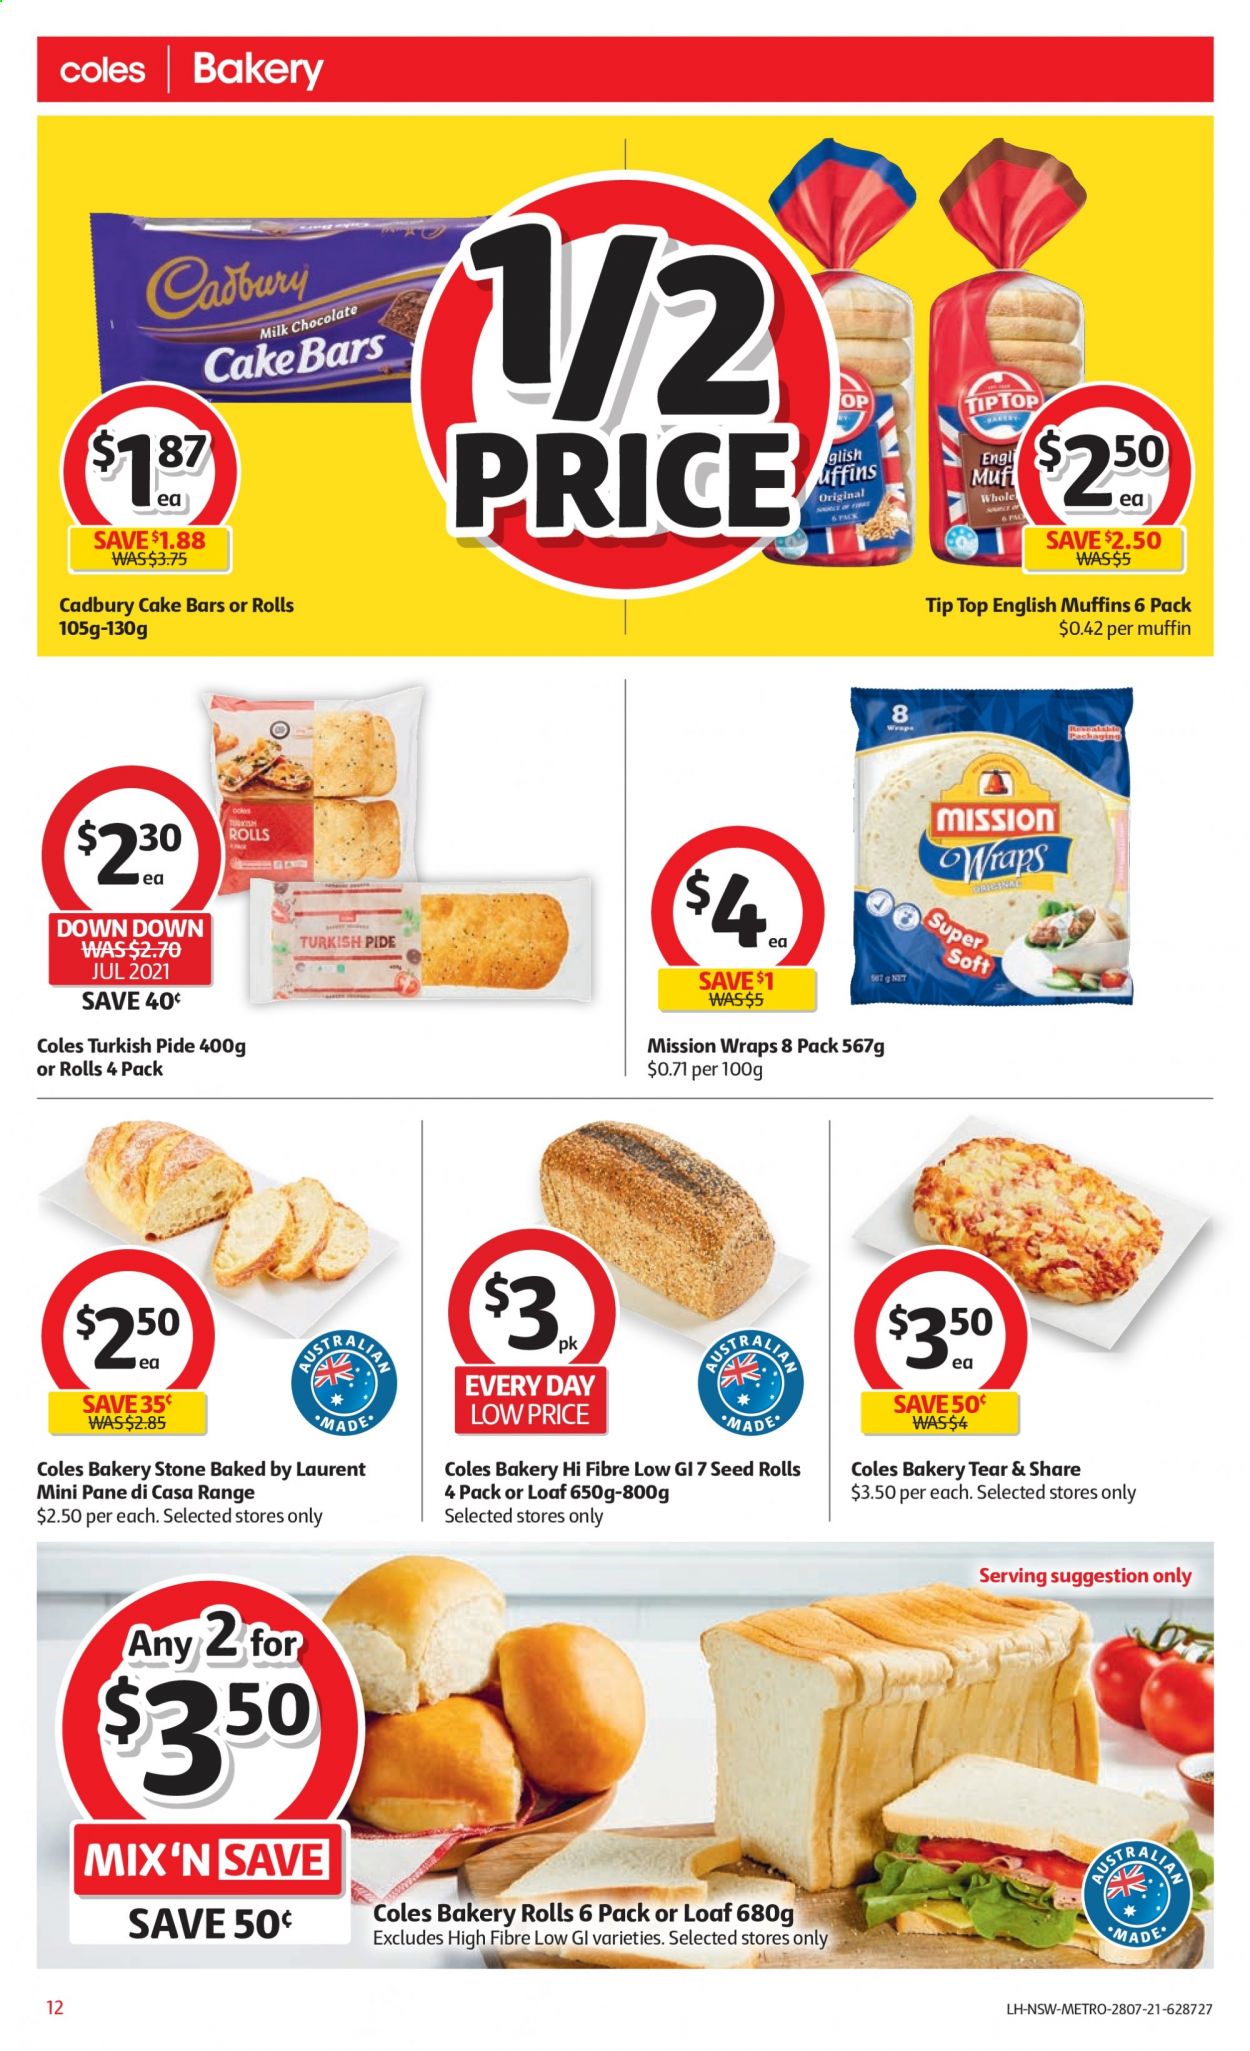 thumbnail - Coles Catalogue - 28 Jul 2021 - 3 Aug 2021 - Sales products - bread, english muffins, Tip Top, buns, wraps, savory pastry, pastries, snack bar, milk chocolate, Cadbury, bars, plant seeds. Page 12.